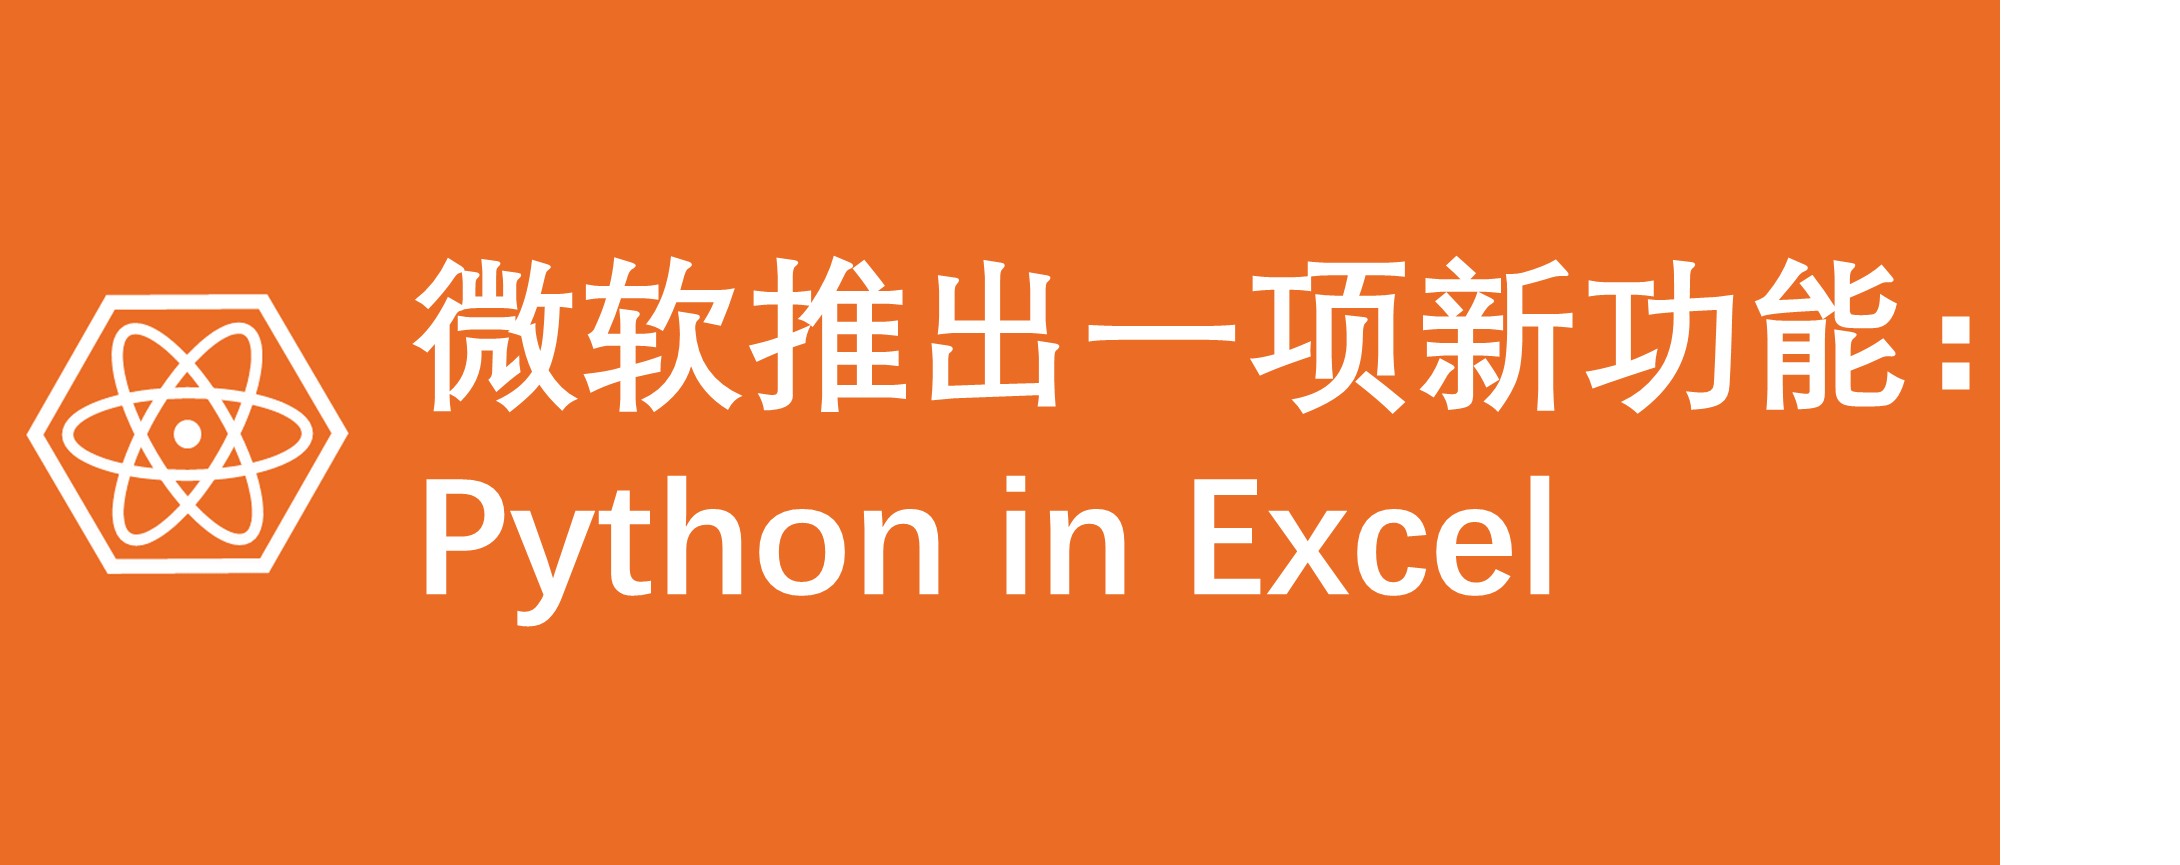 <span style='color:red;'>微</span><span style='color:red;'>软</span><span style='color:red;'>推出</span>一项新功能：Python in Excel